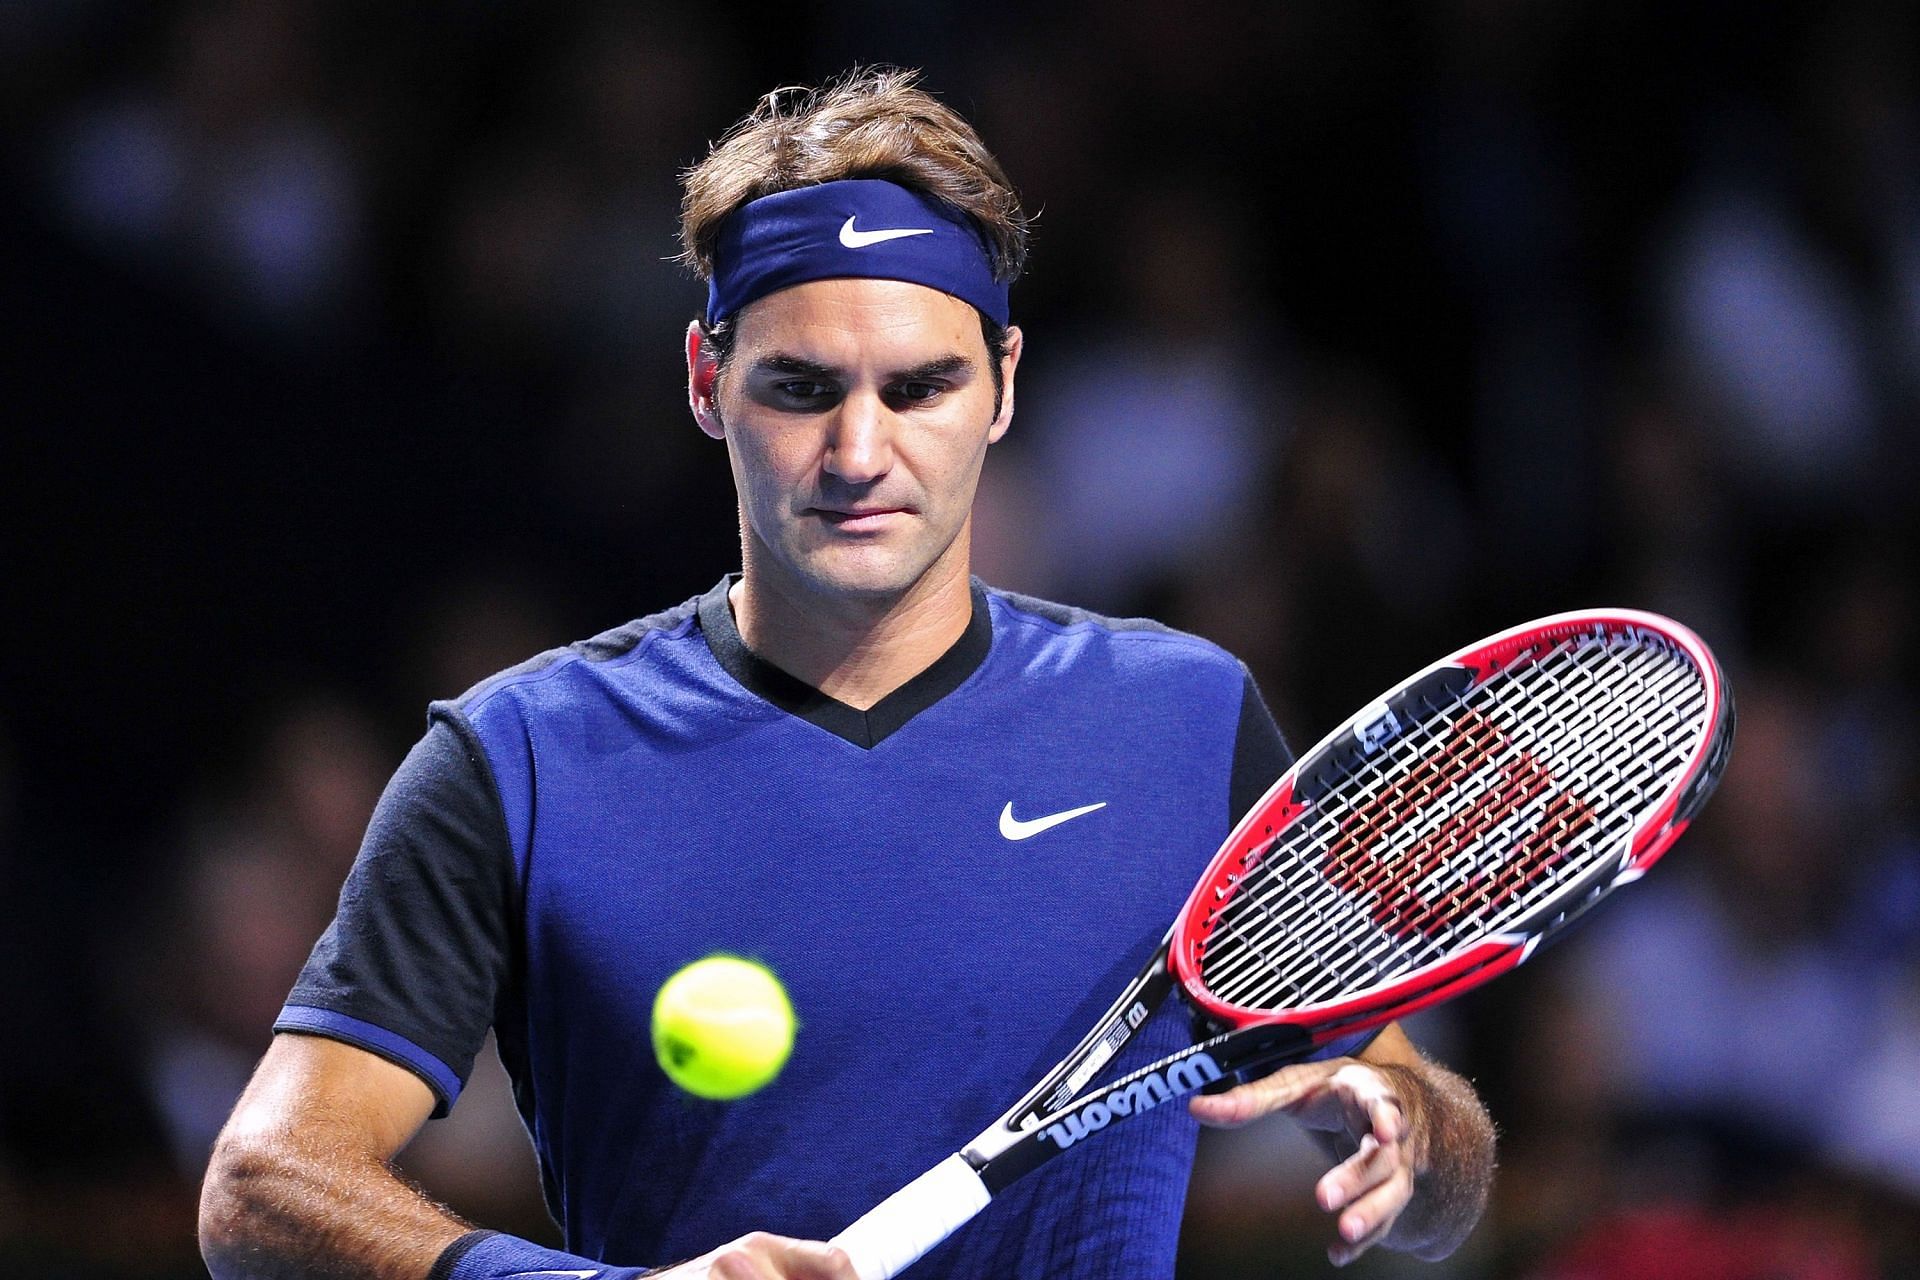 Roger Federer has been announced to feature at the 2022 Swiss Indoors